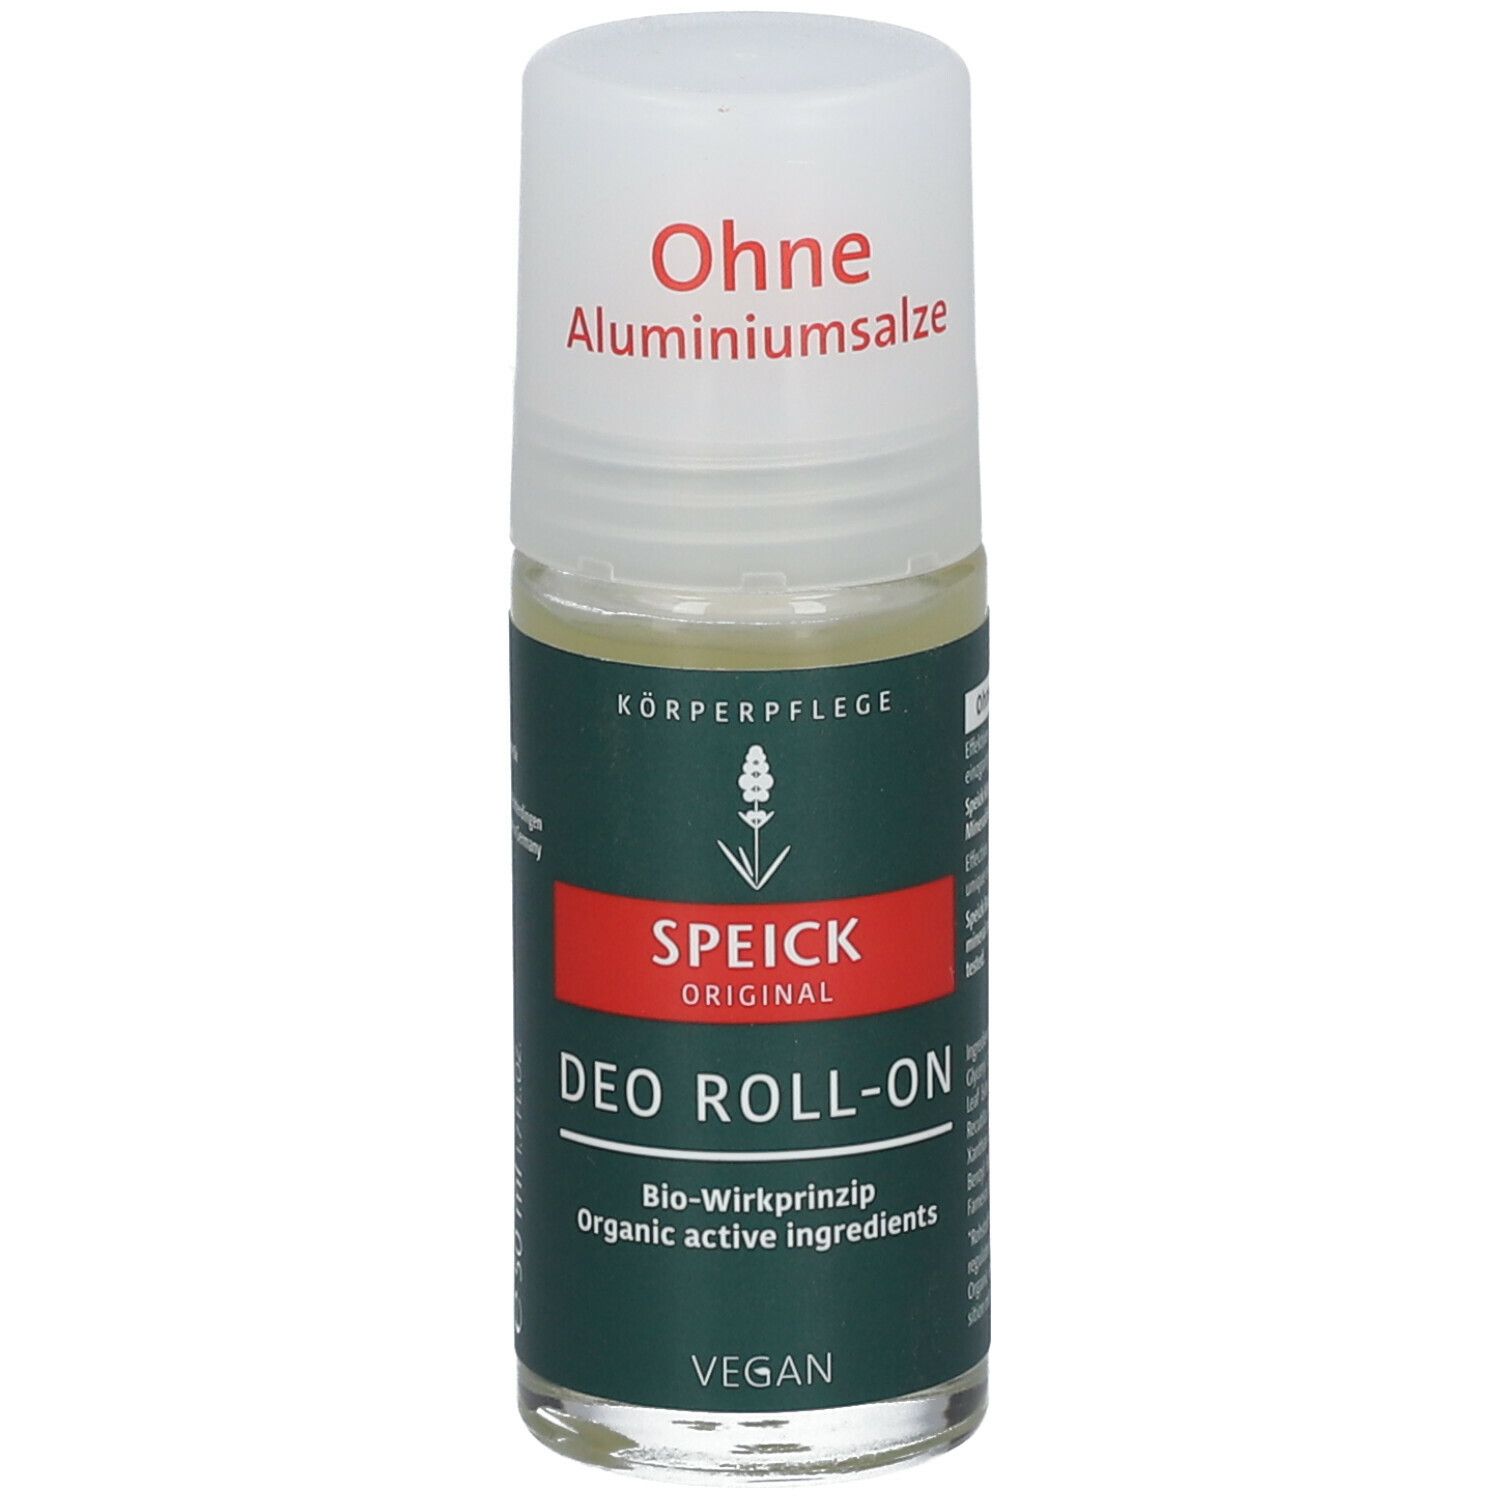 SPEICK Natural Deo Roll-on